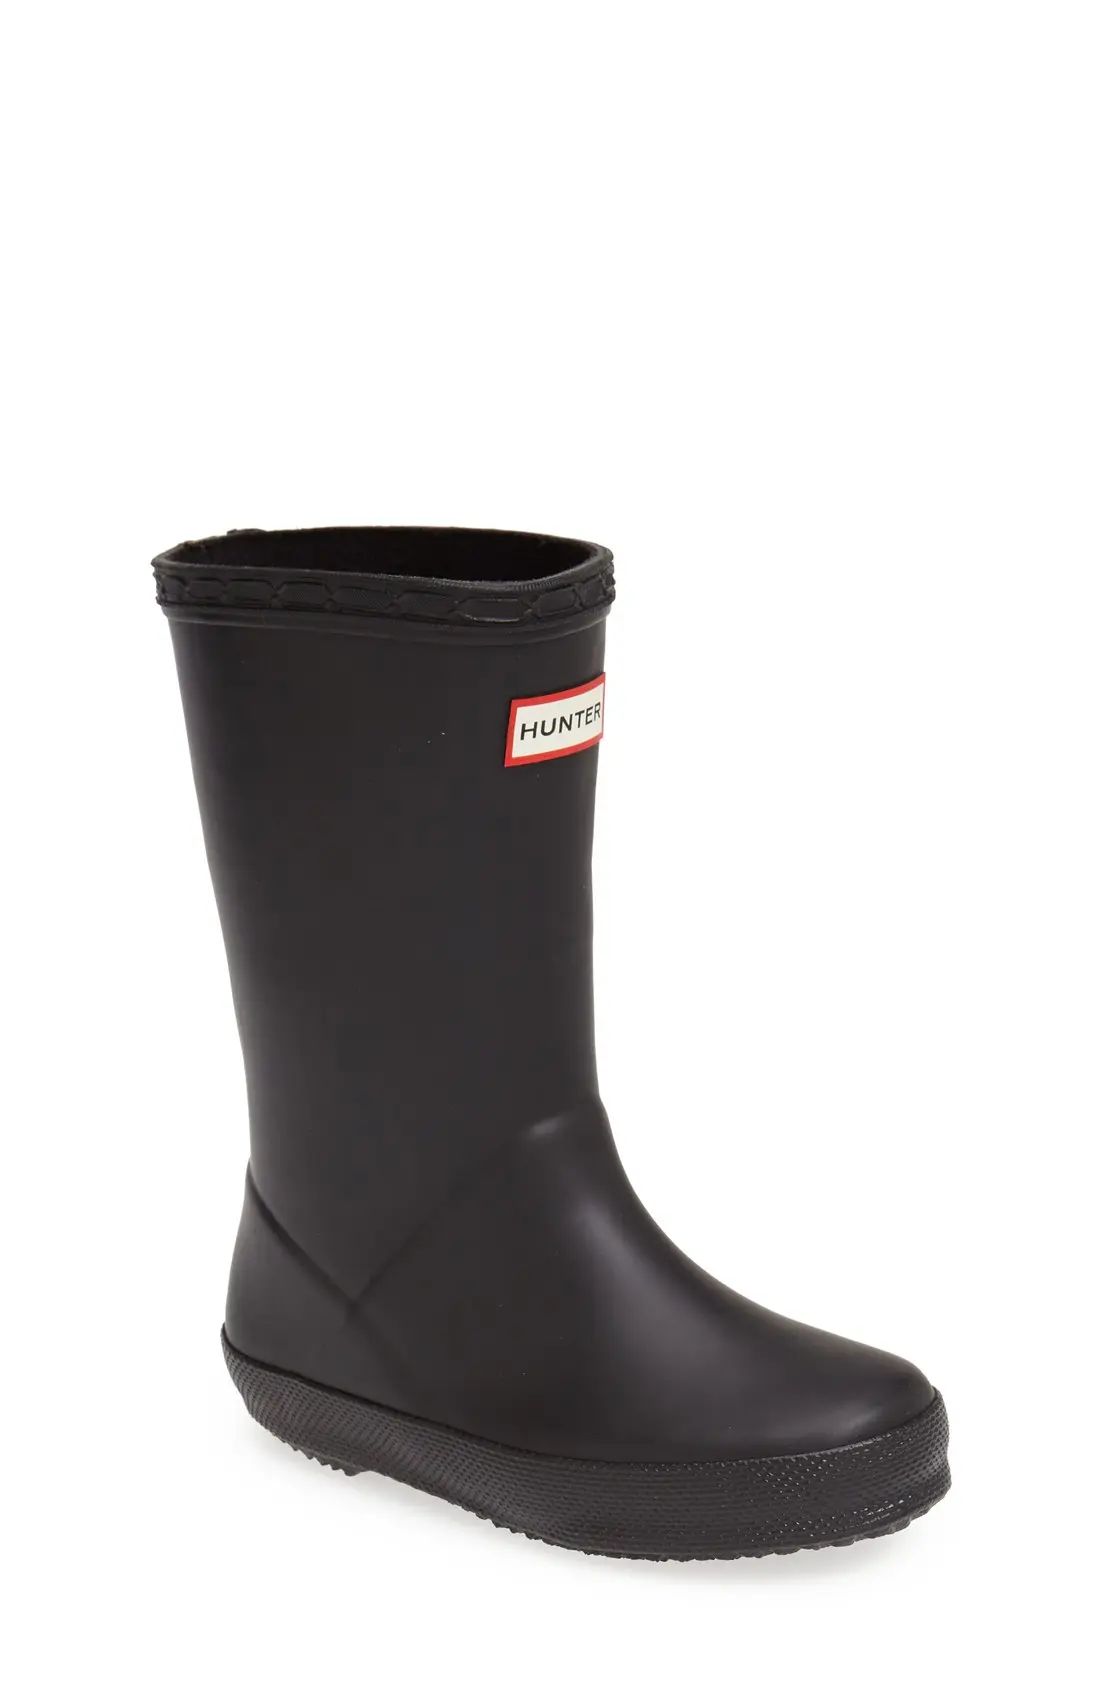 Toddler Hunter First Classic Waterproof Rain Boot, Size 5 M - Black | Nordstrom